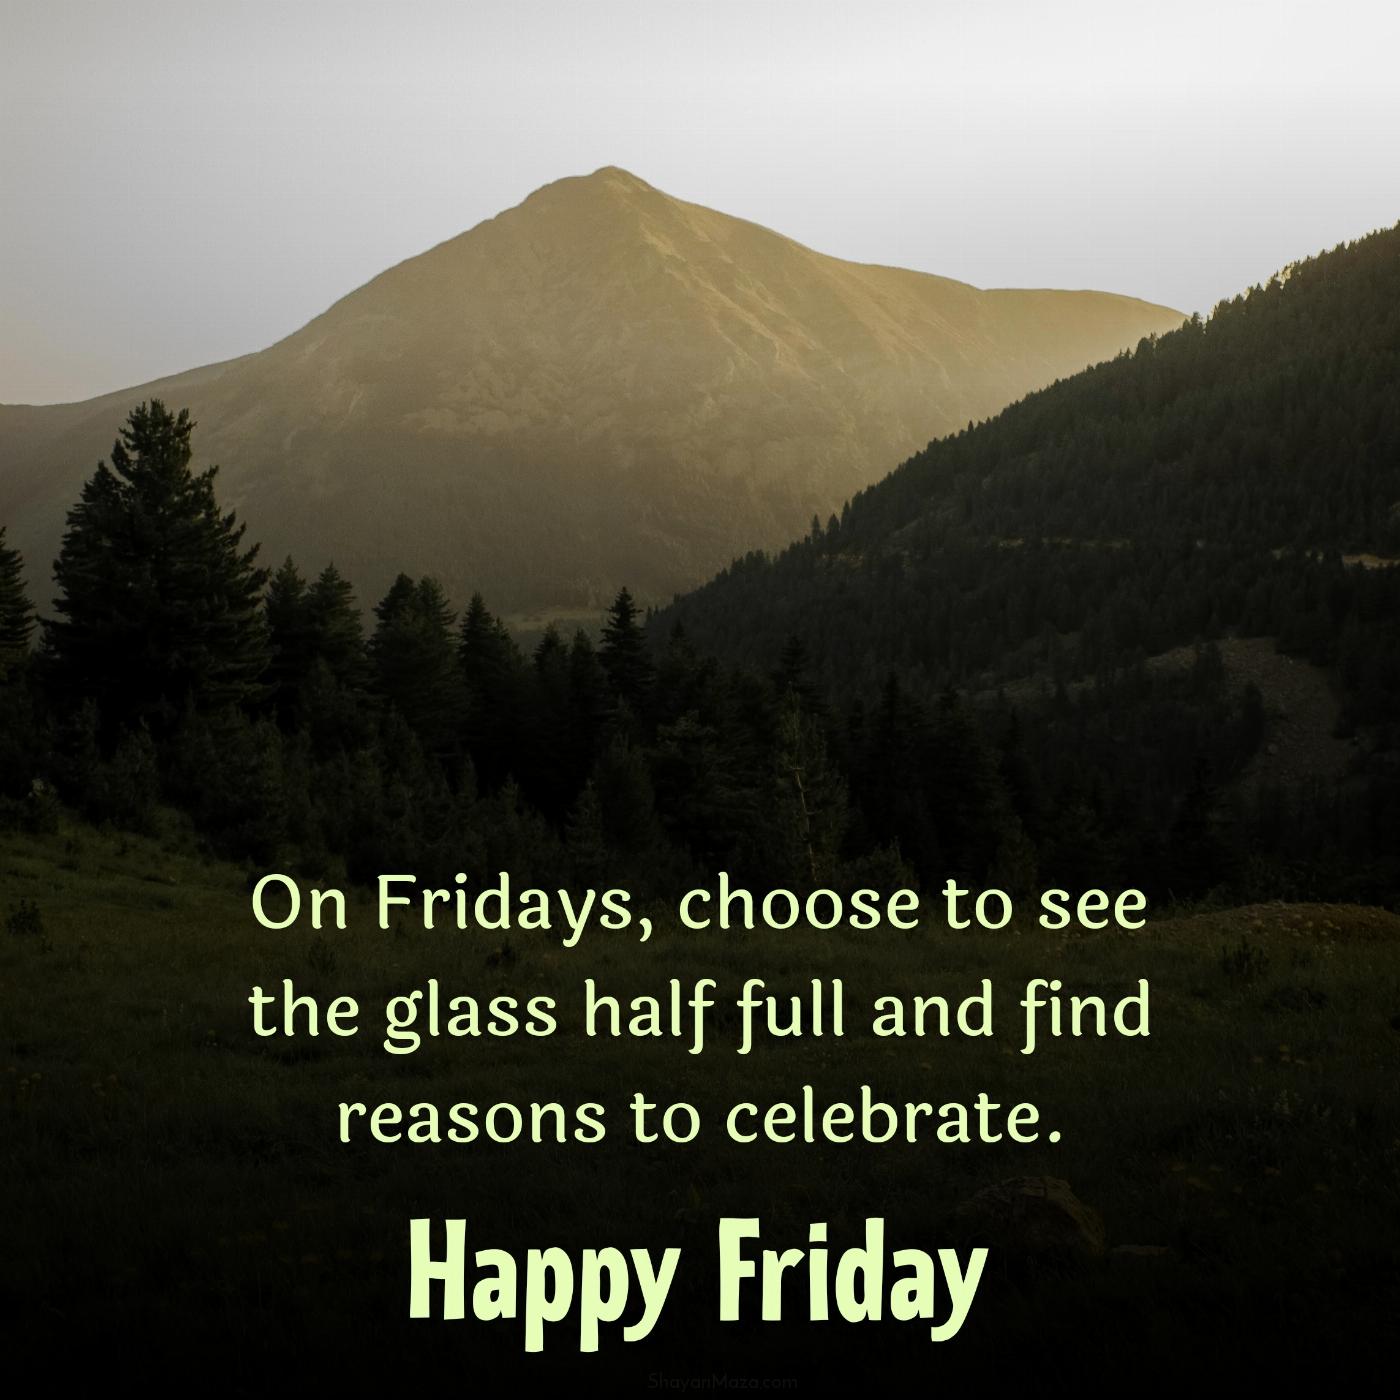 On Fridays choose to see the glass half full and find reasons